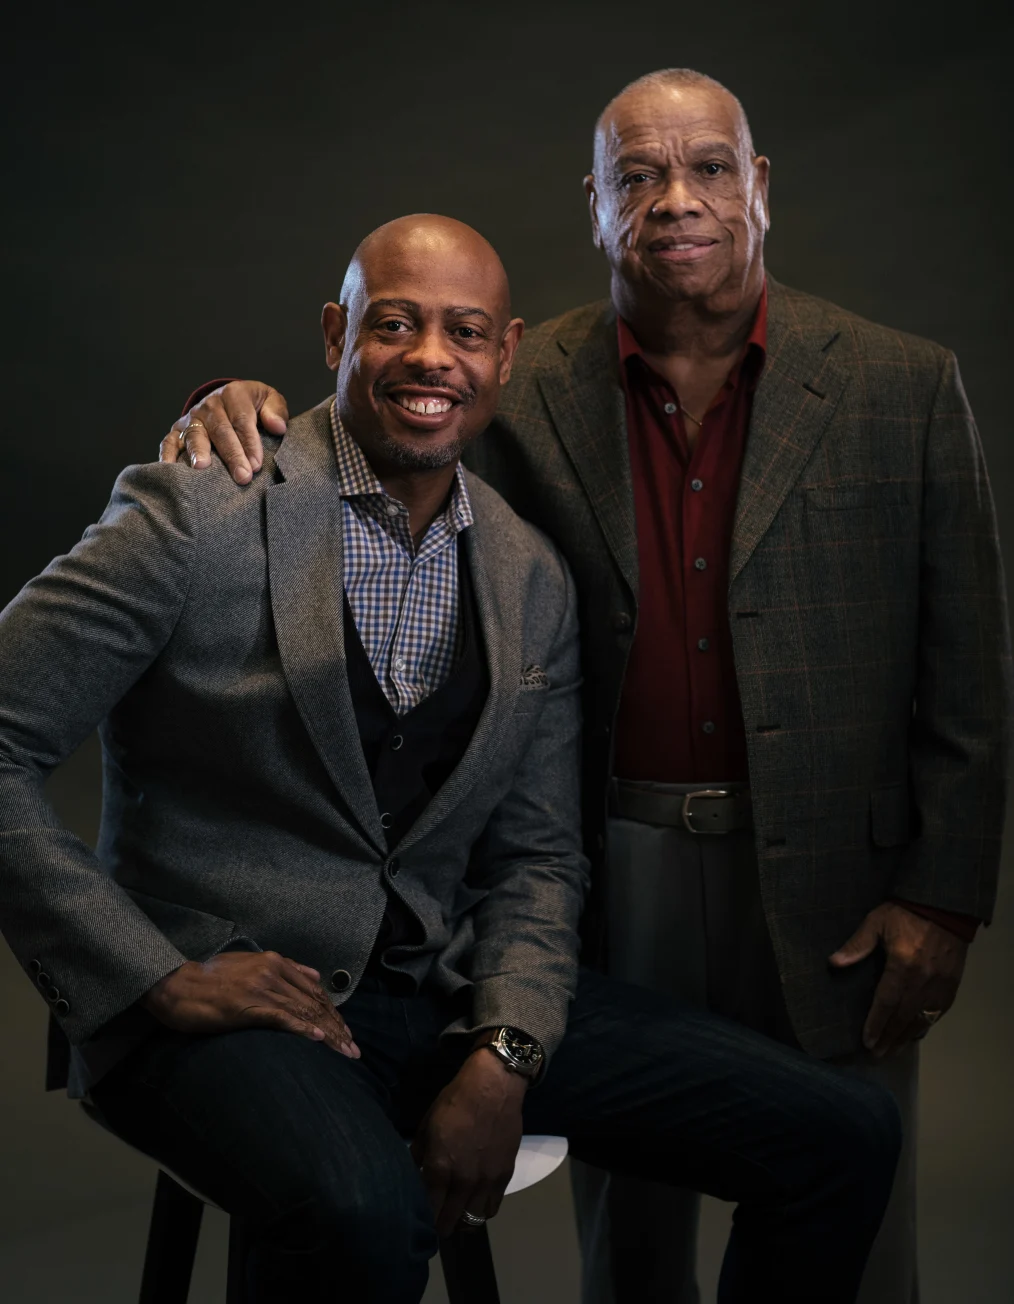 This picture shows two men with deep skin tones wearing business casual clothes smiling toward
the camera.